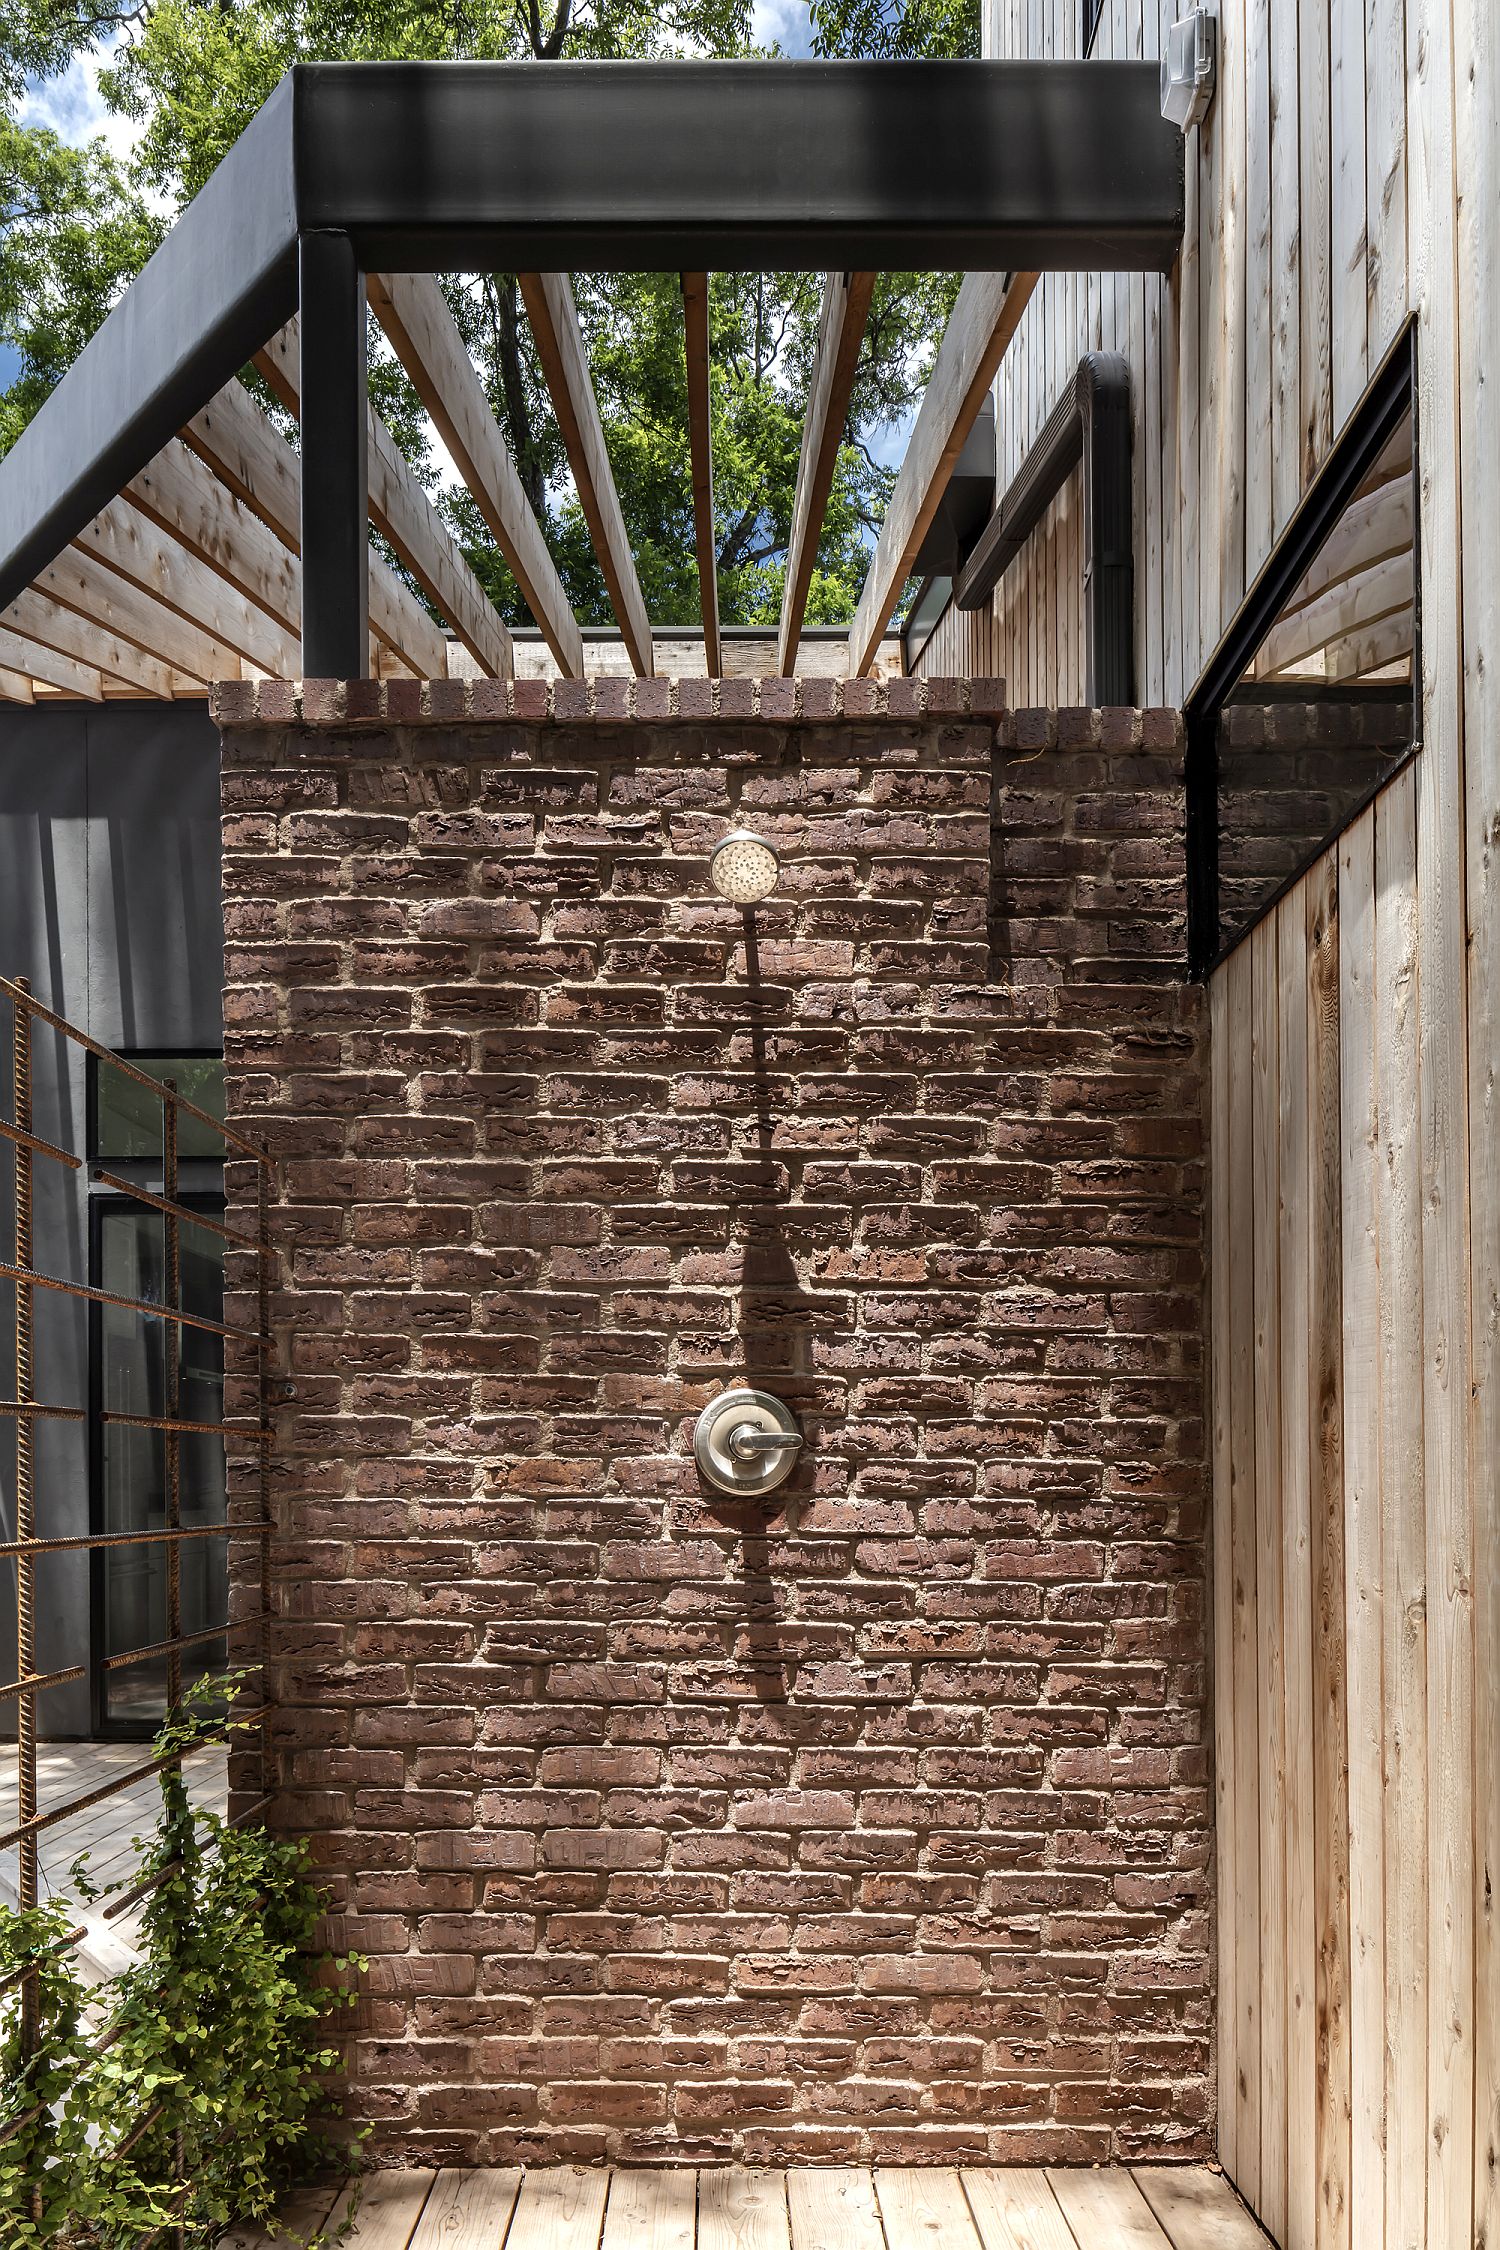 Brick wall sections of the house give it a timeless appeal